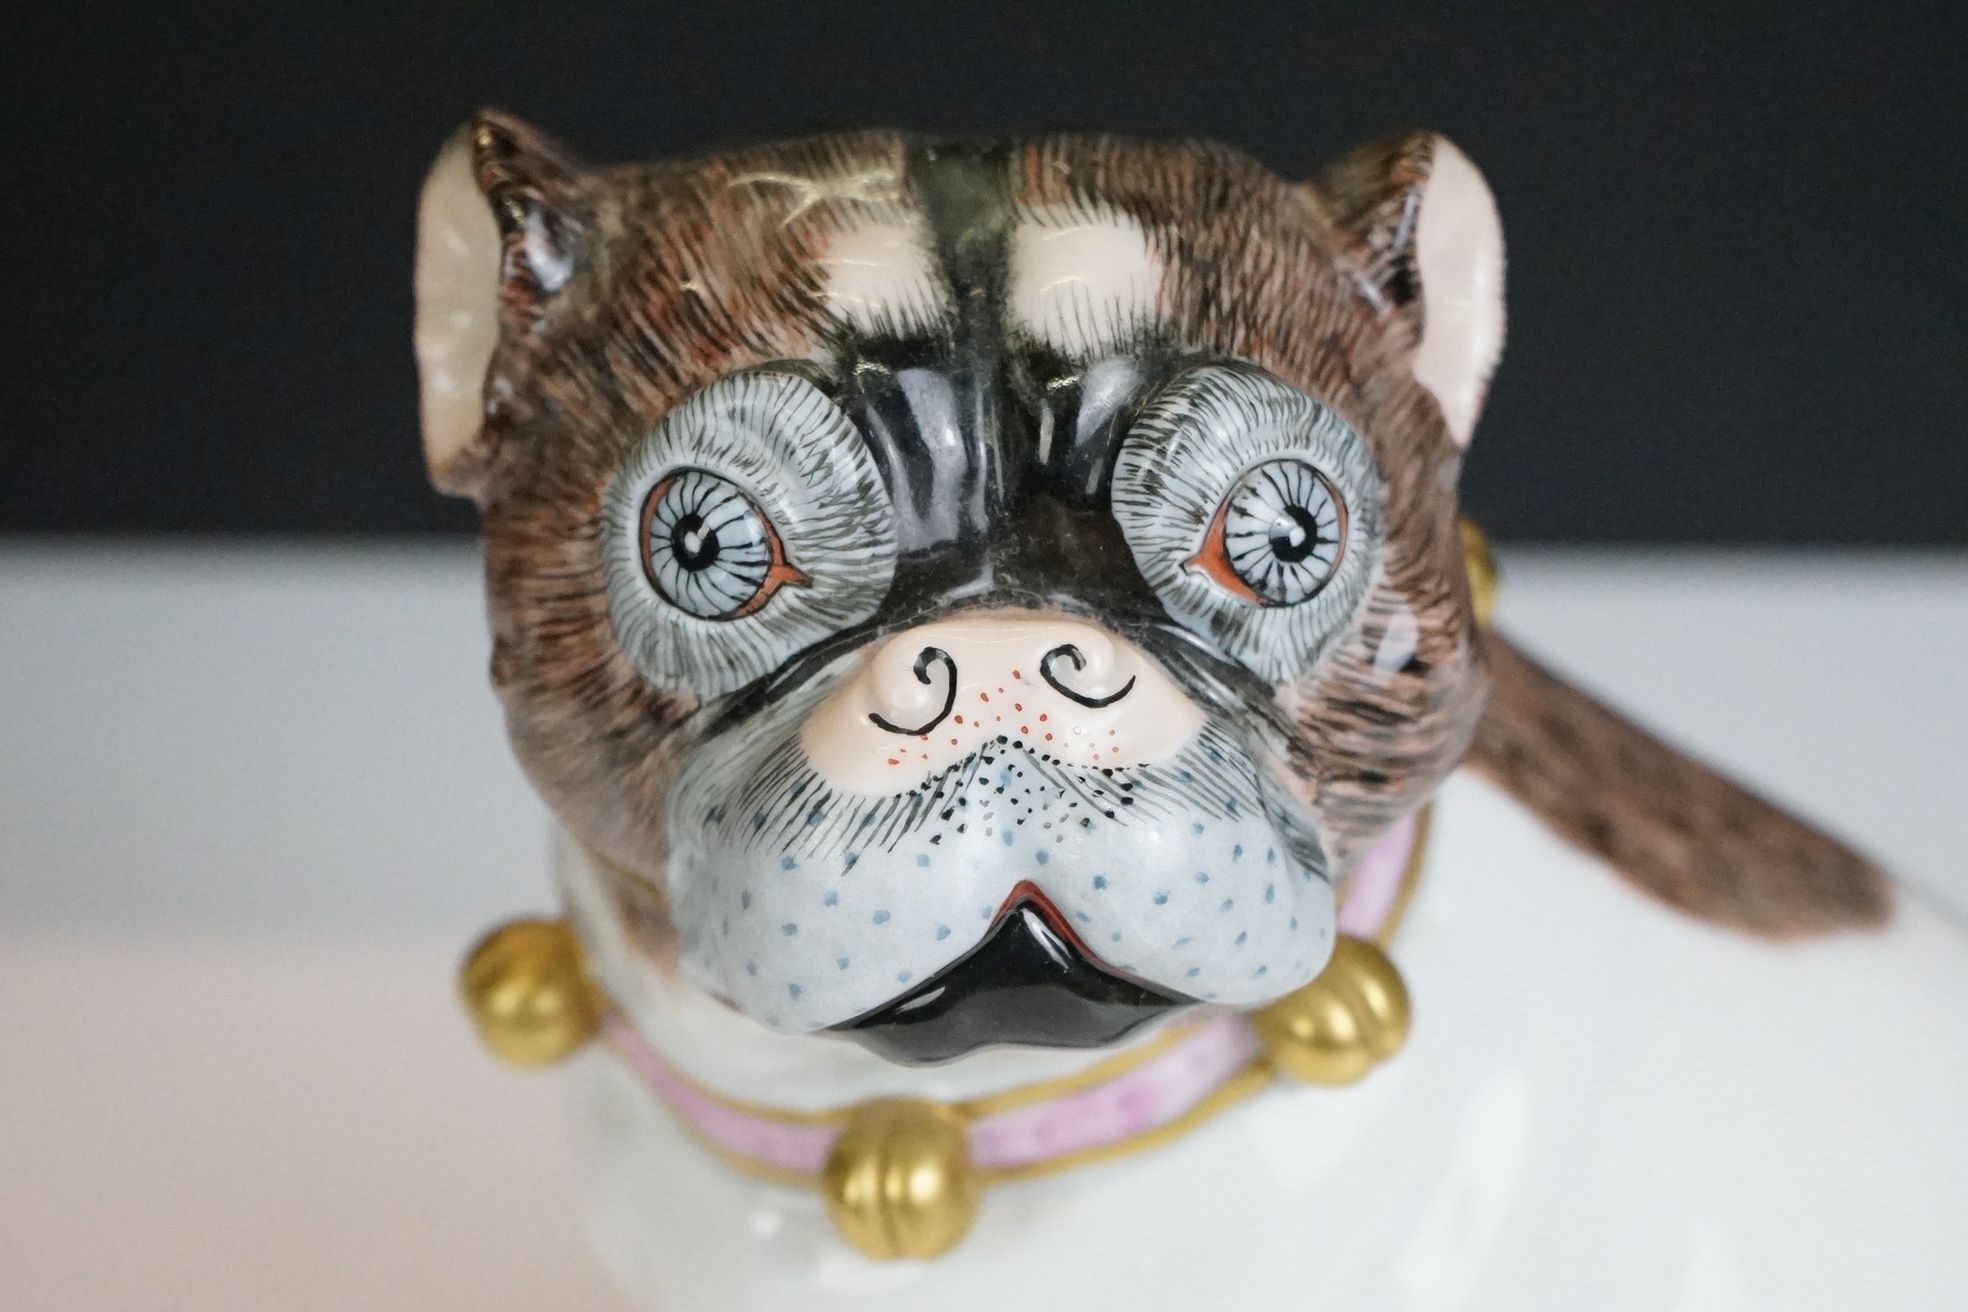 Near pair of 20th Century Dresden seated Pug figures, wearing gilt & pink collars, with hand painted - Image 15 of 17